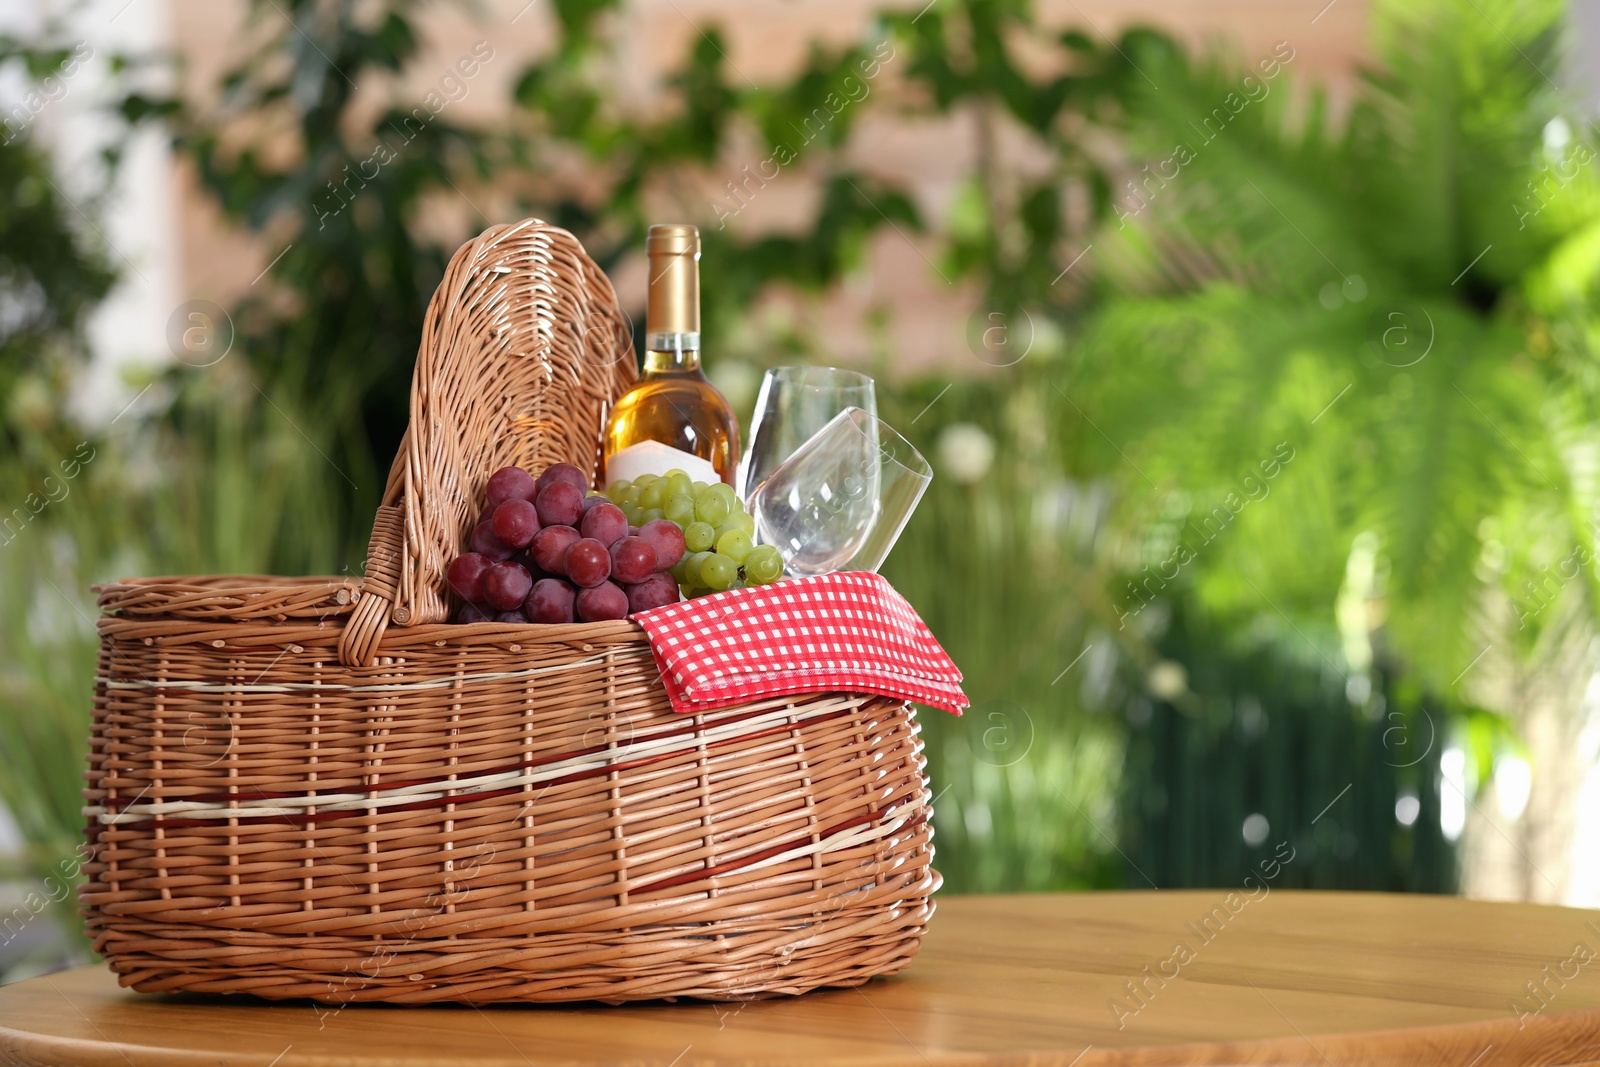 Photo of Picnic basket with wine, glasses and grapes on wooden table against blurred background, space for text